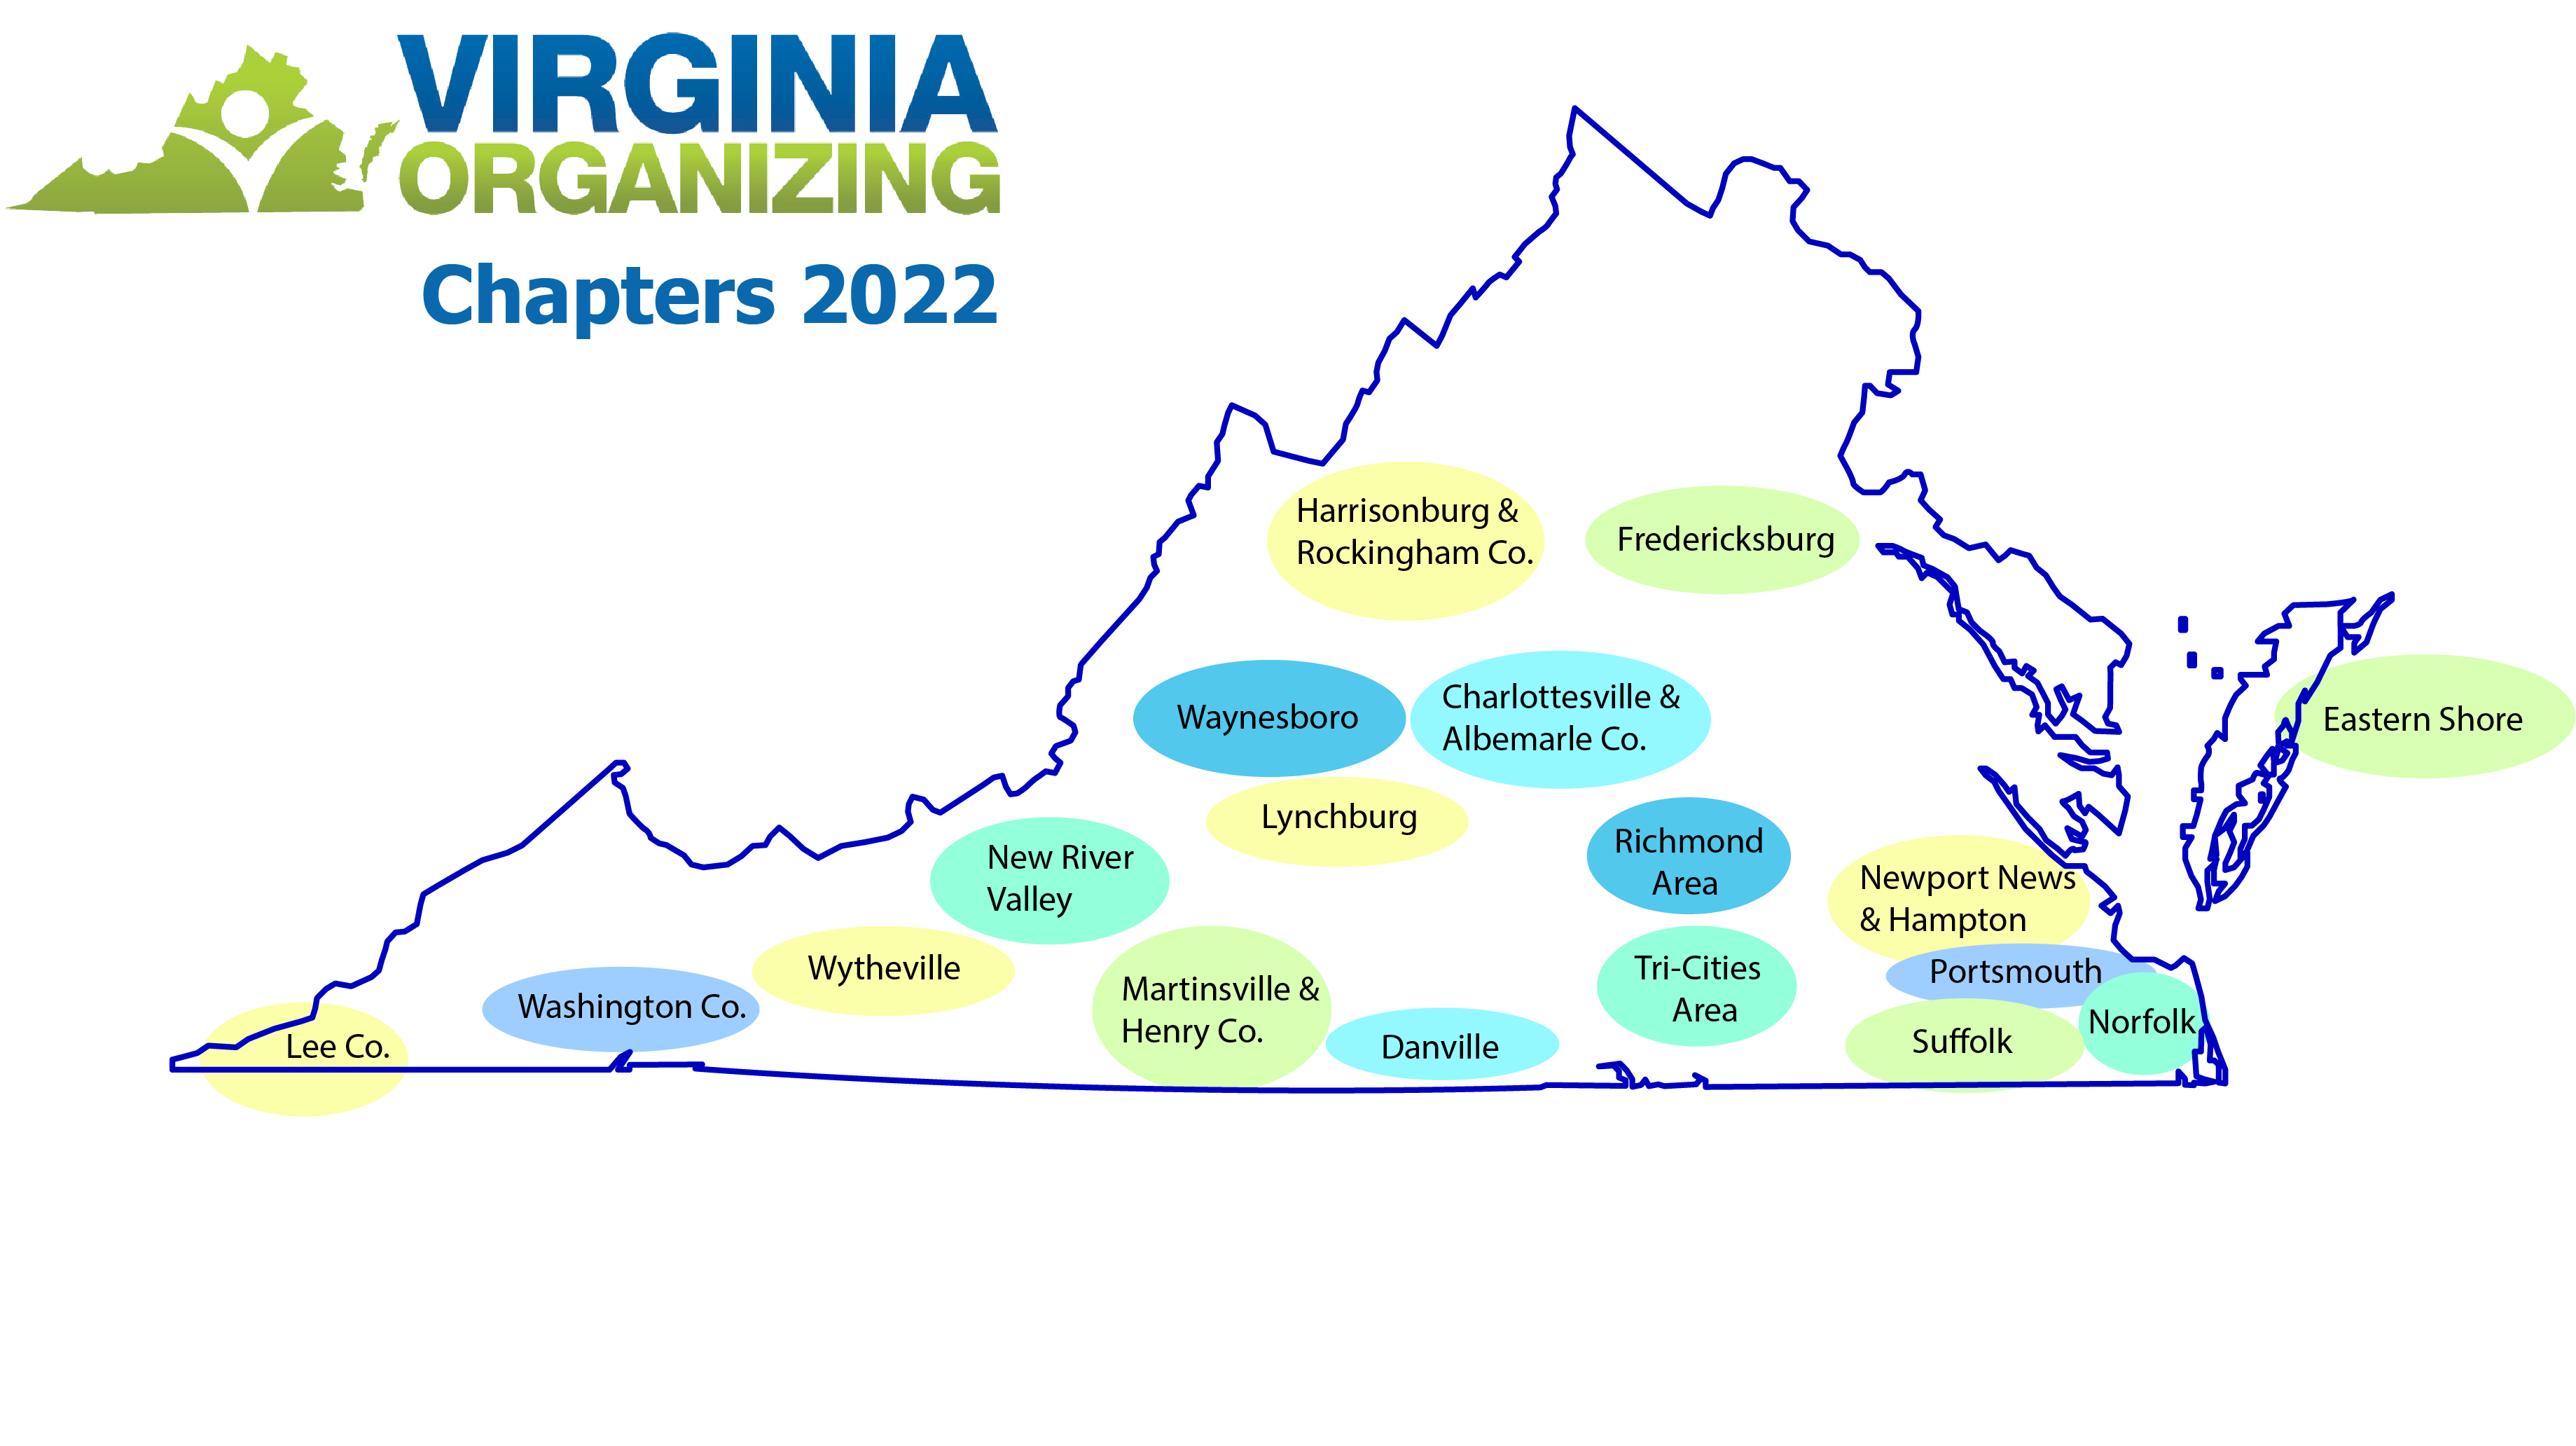 Graphic: logo and title "Chapters 2022" and an outline of the map of Virginia with colorful bubbles showing each of the 18 areas where we are organizing.